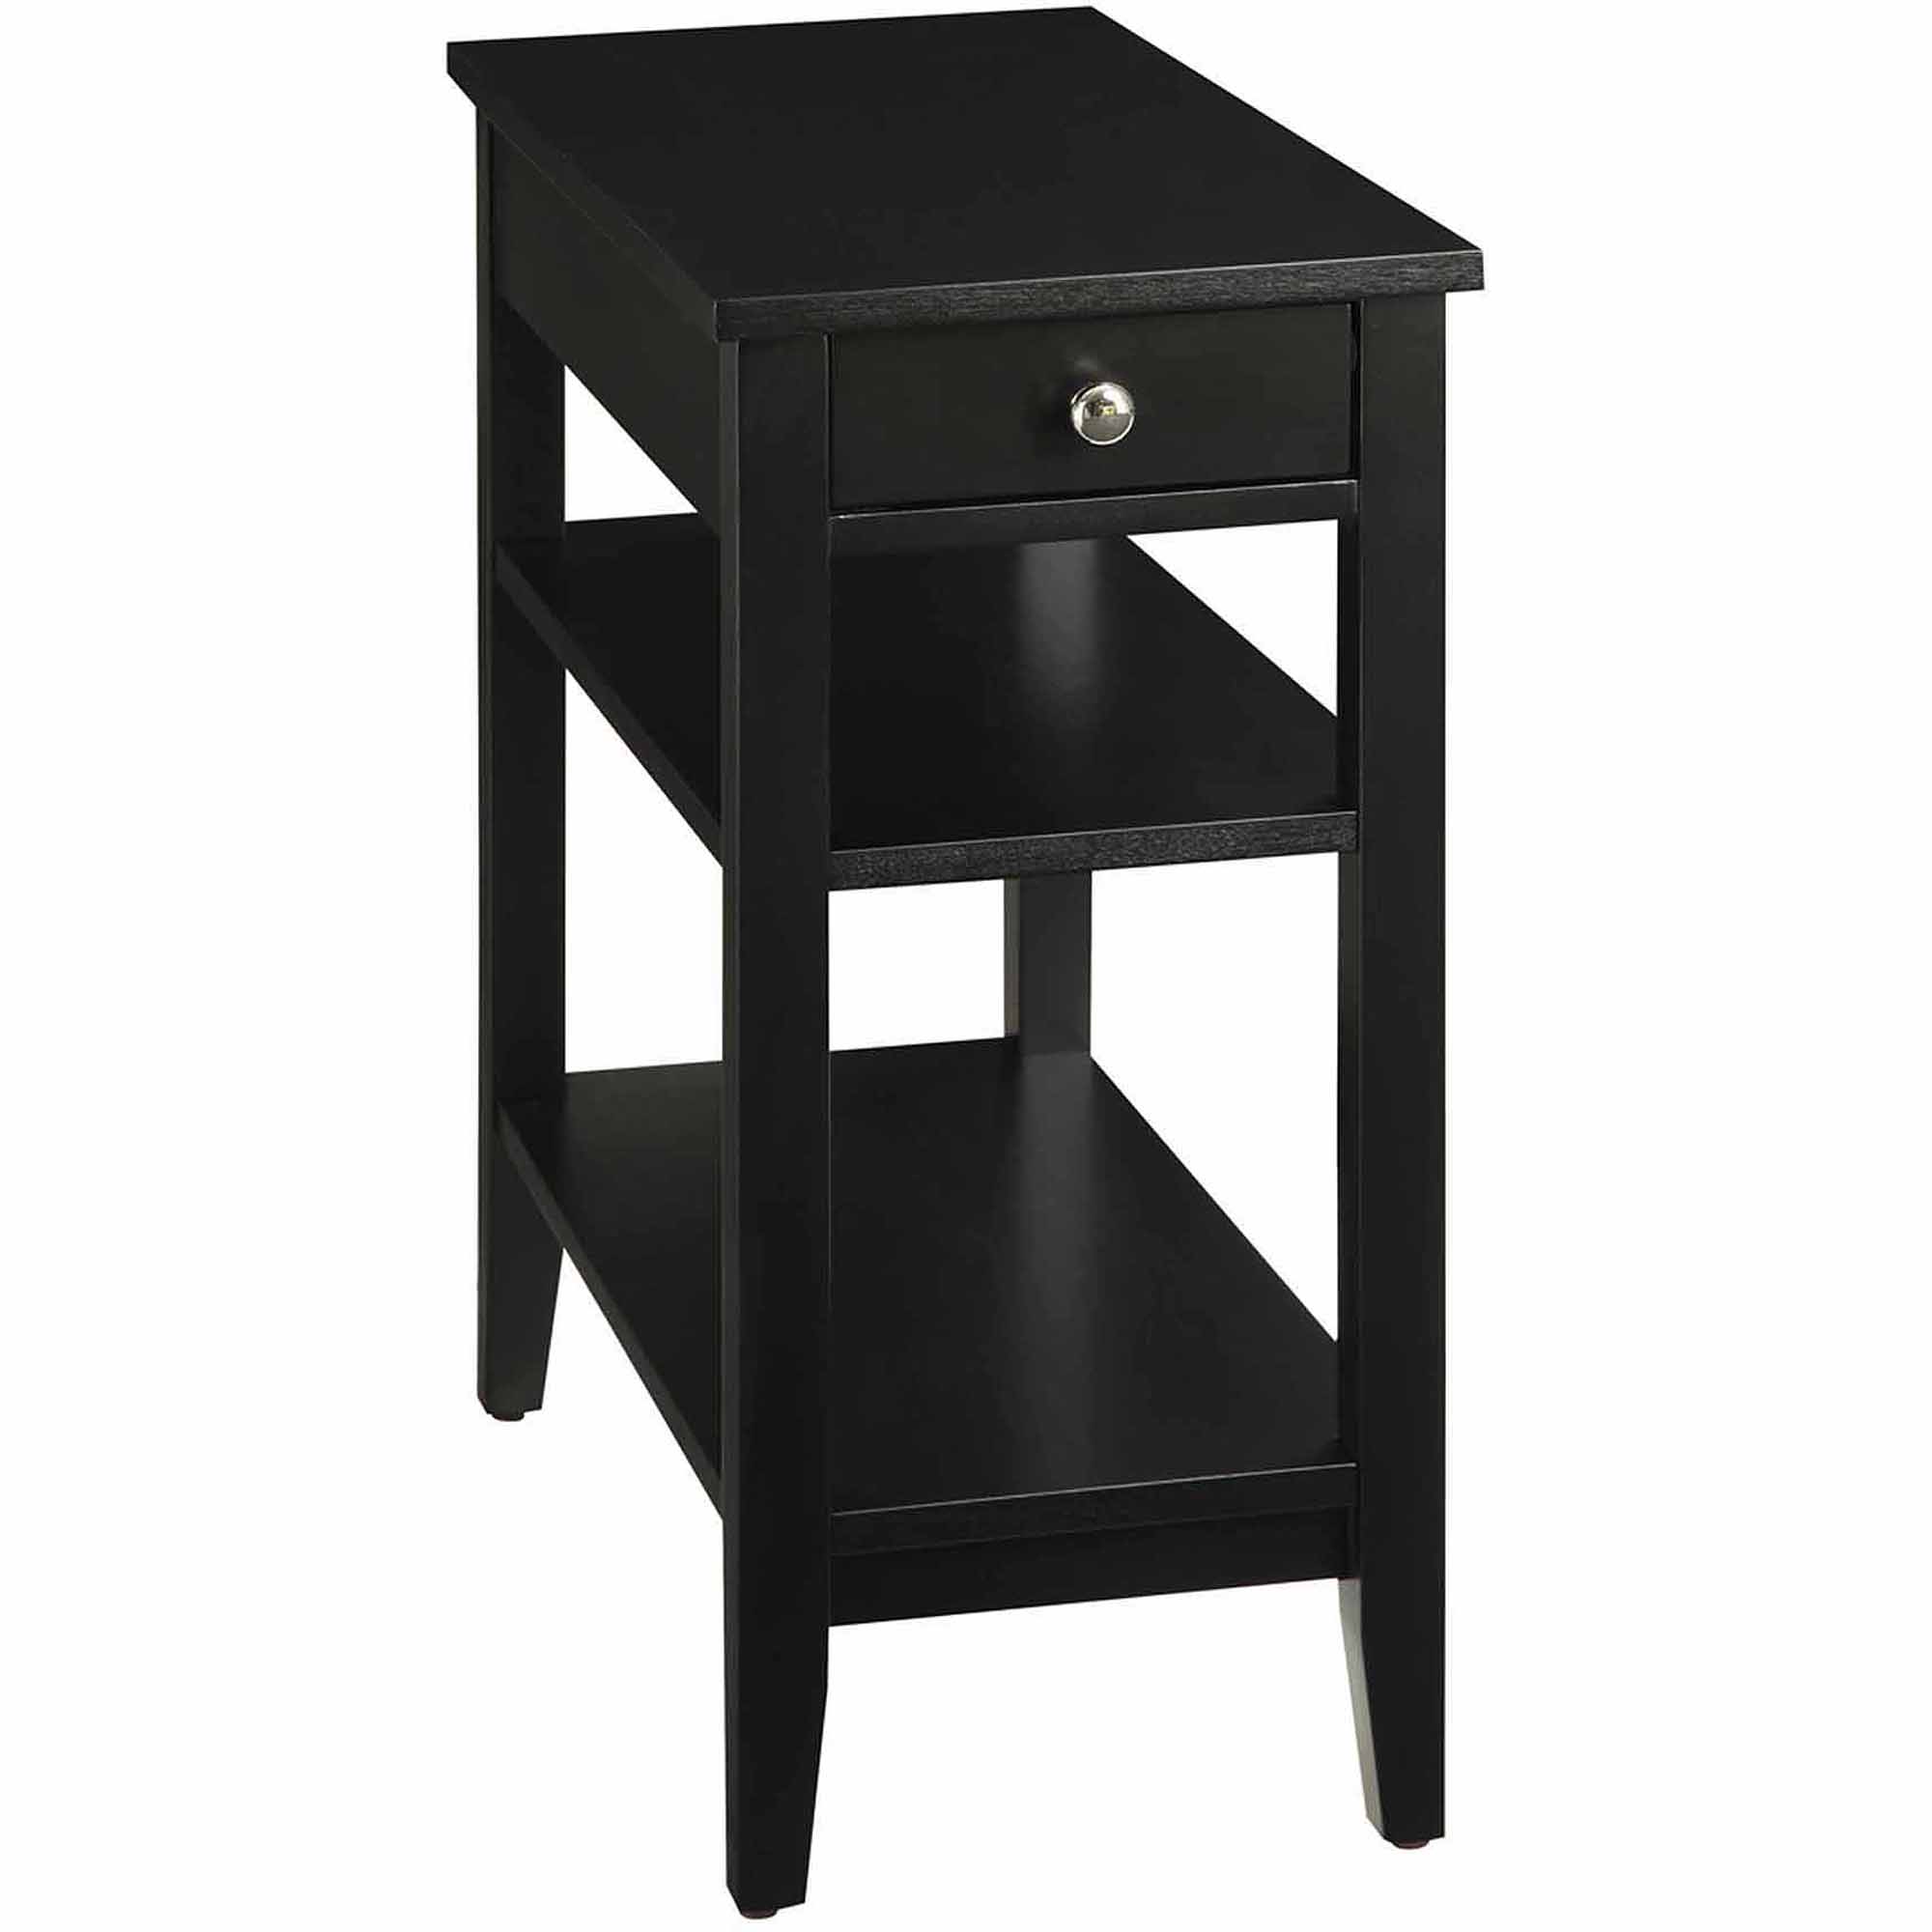 vintage looking end tables the super fun black side table with accent drawers tall storage best elegant wood tier drawer for your living room design inch high linens bedside ideas